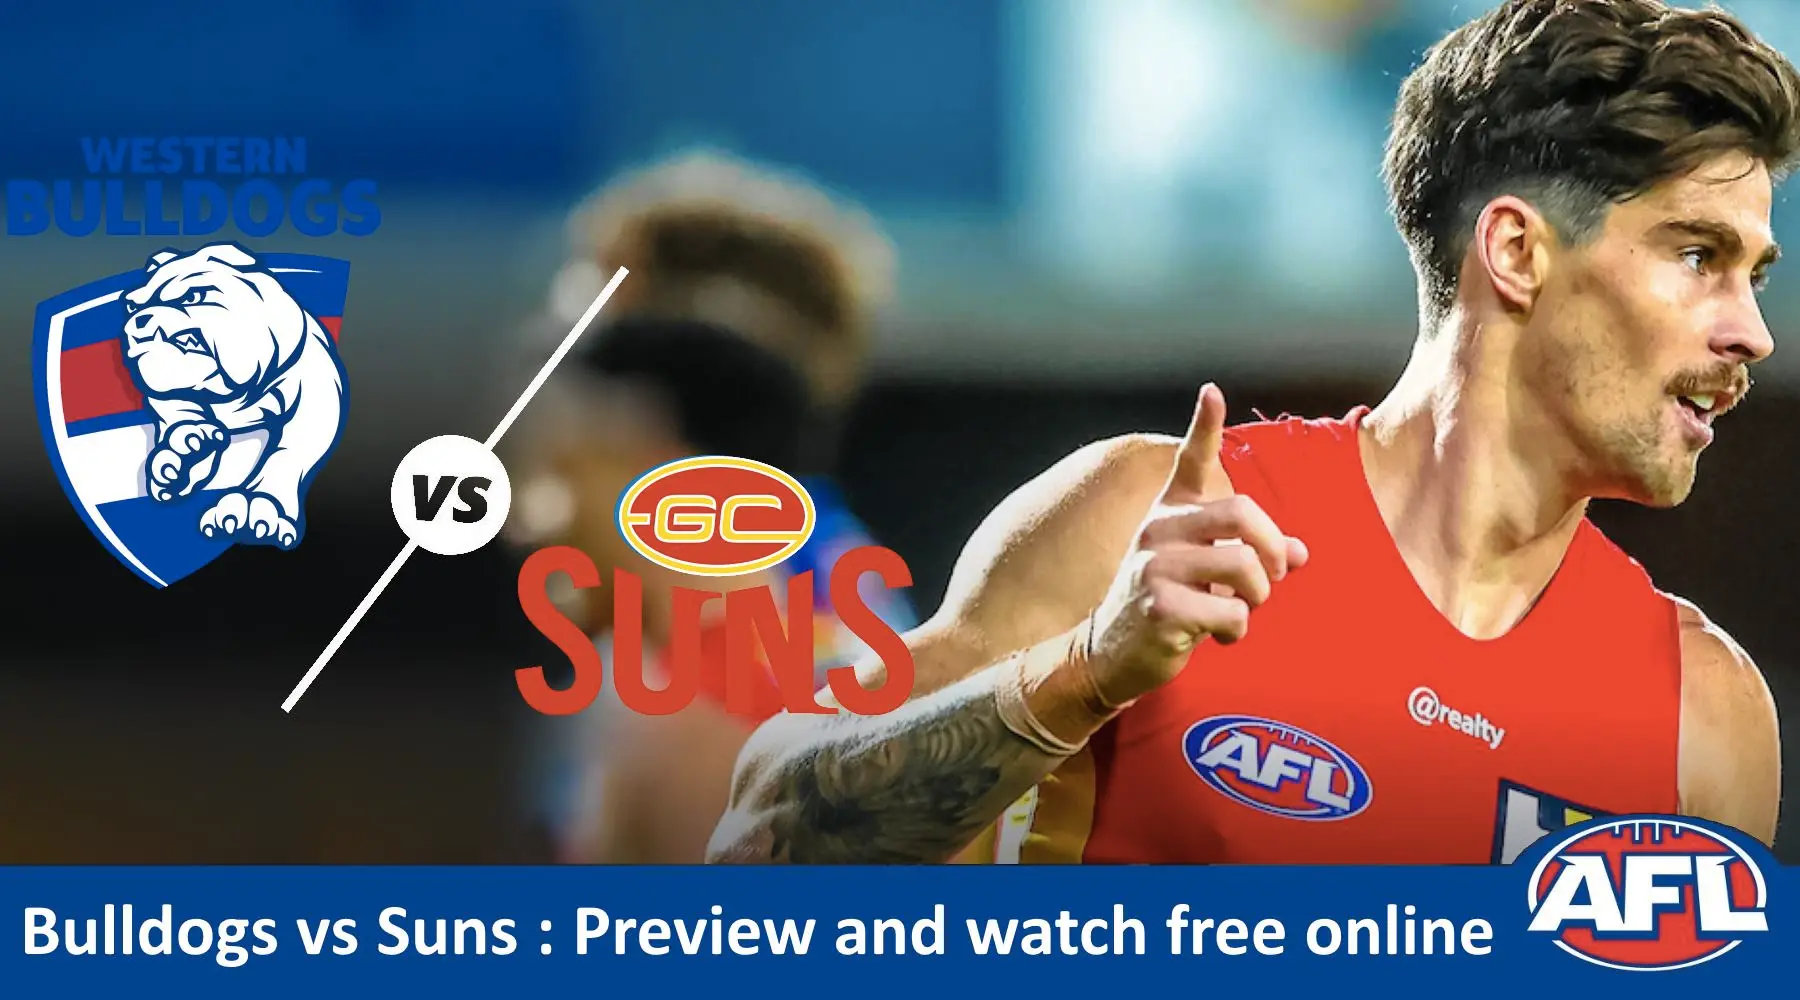 Watch Bulldogs vs Gold Coast AFL live and match preview